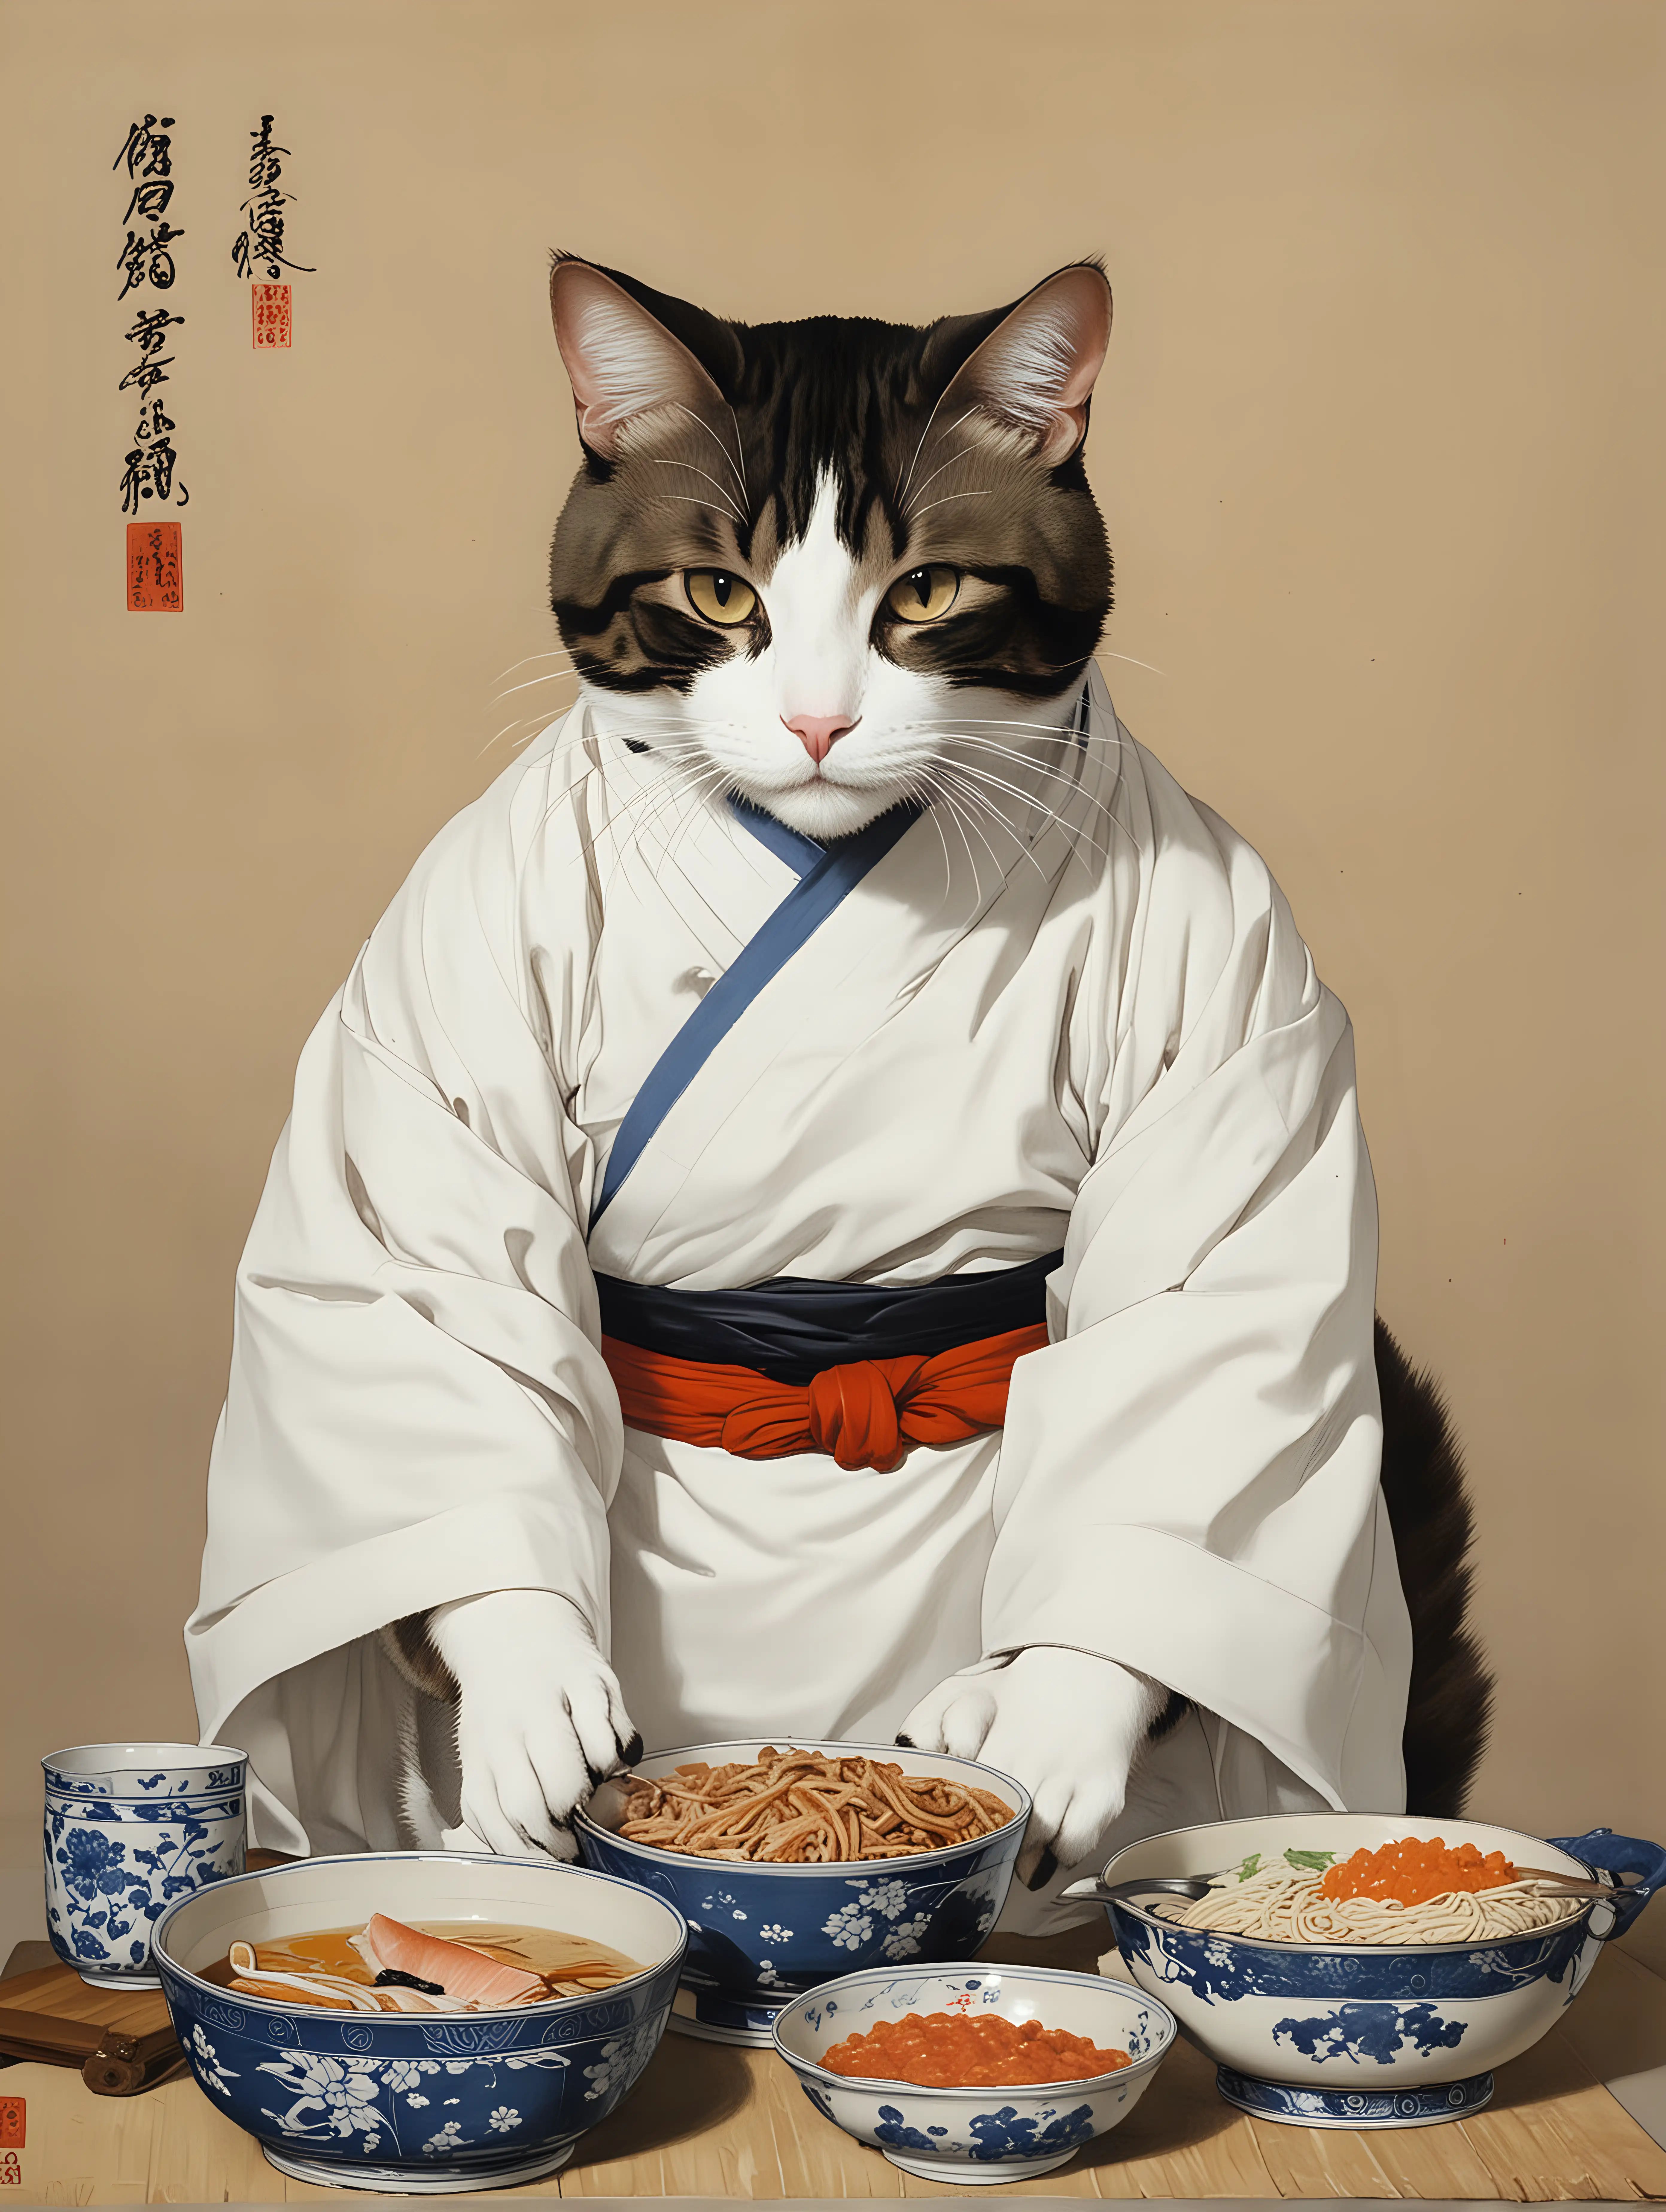 A painting by Kitagawa Utamaro of a domestic cat in a Japanese chef's uniform, preparing a traditional Japanese meal.